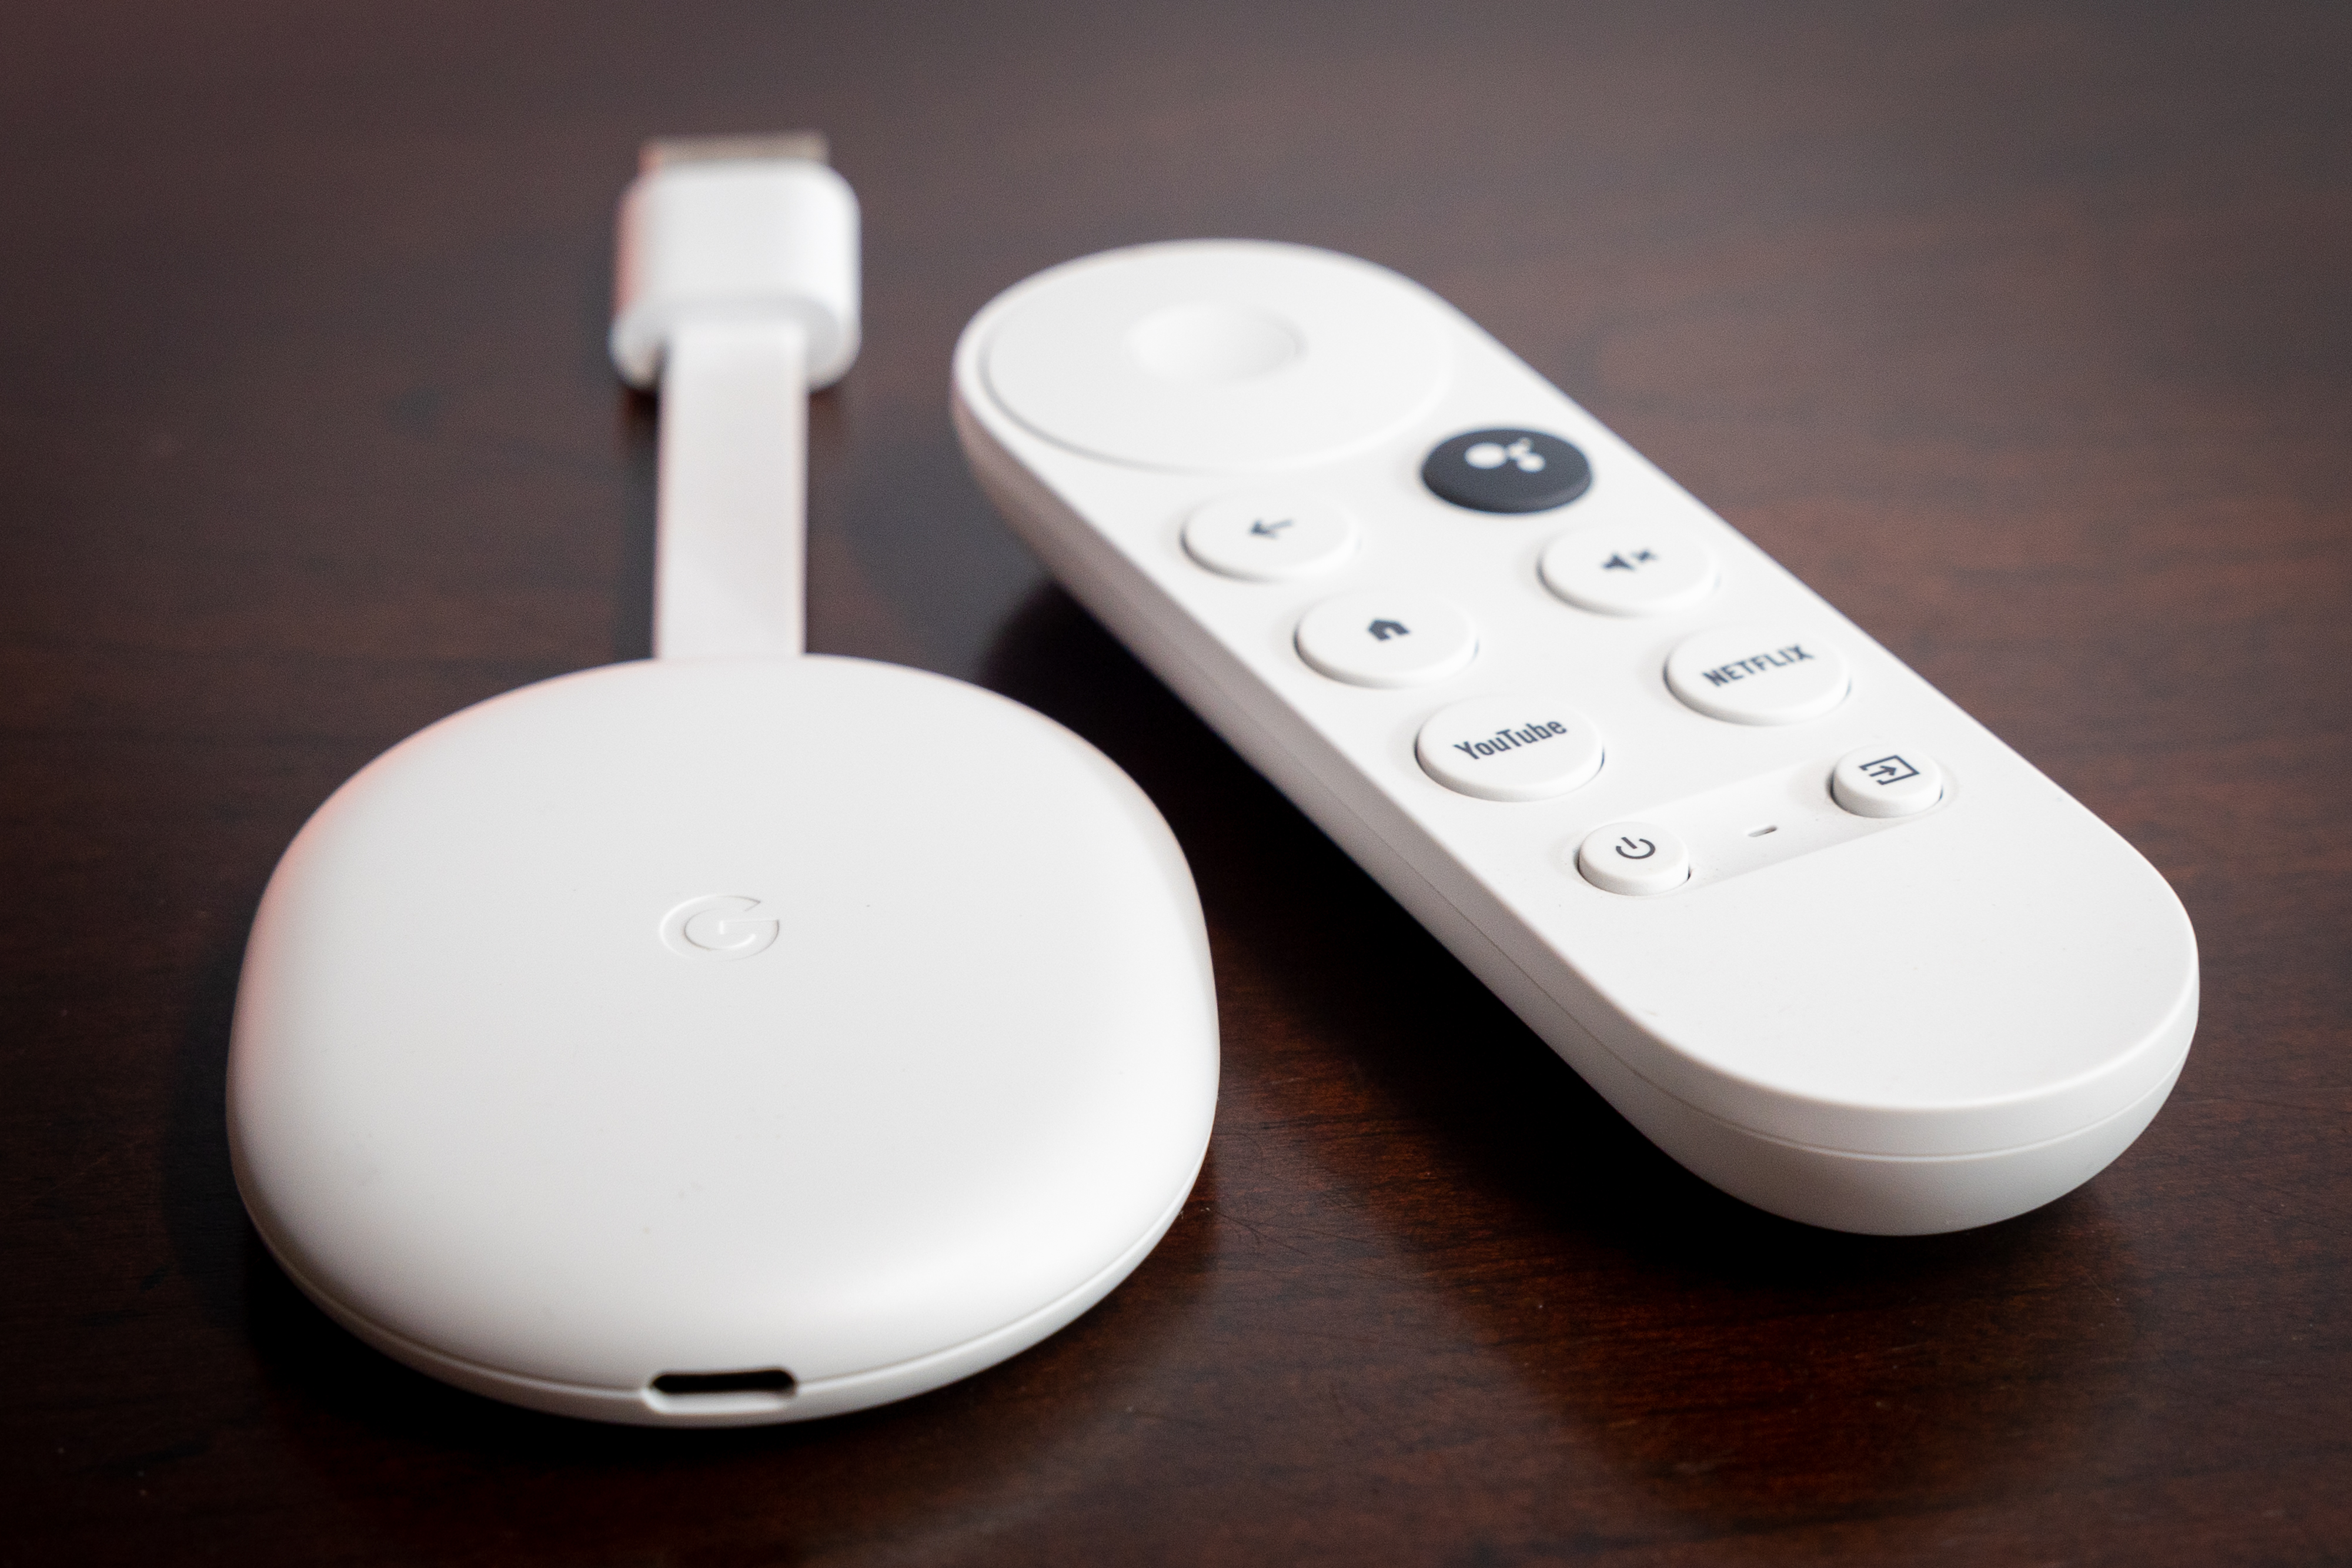 How to reconnect a Chromecast with Google TV remote